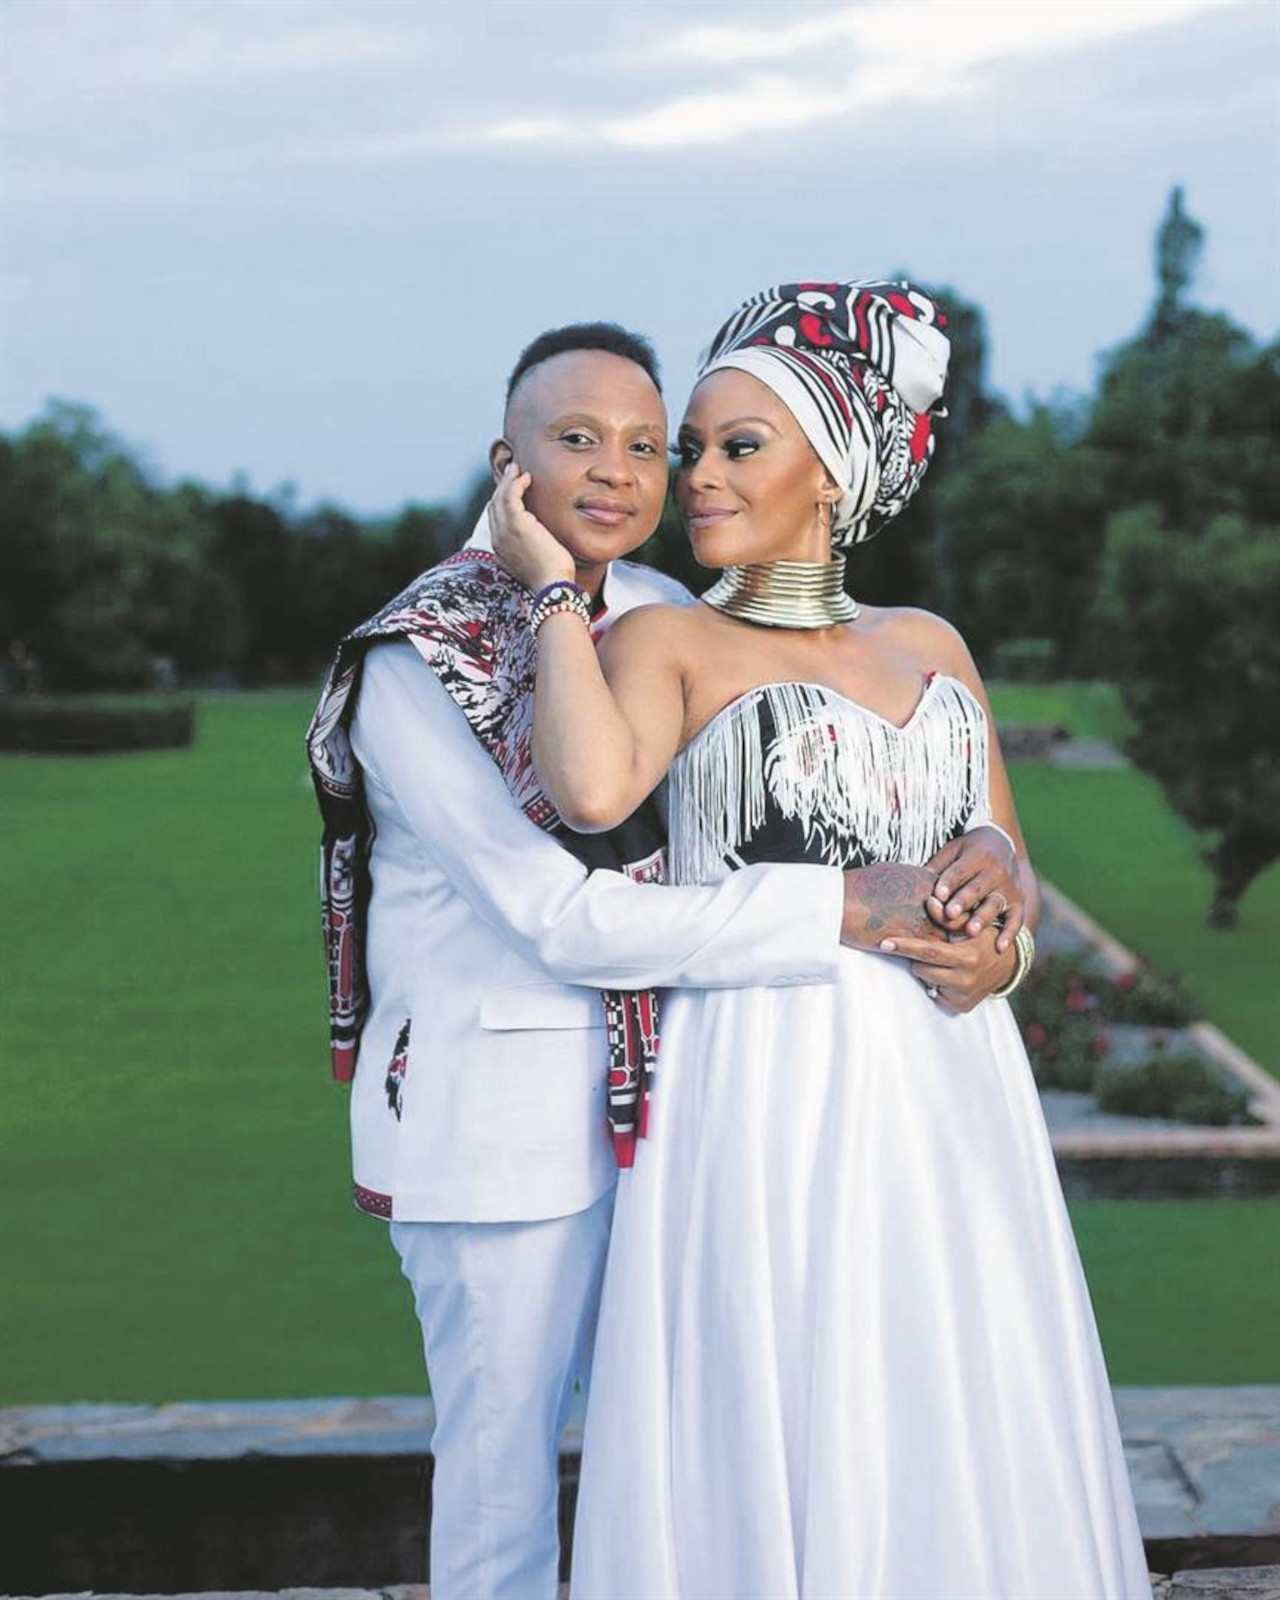 Tshidi From Generations’ Sexually Assaulted, Wife Lebo Arrested For Trying to Protect Her 